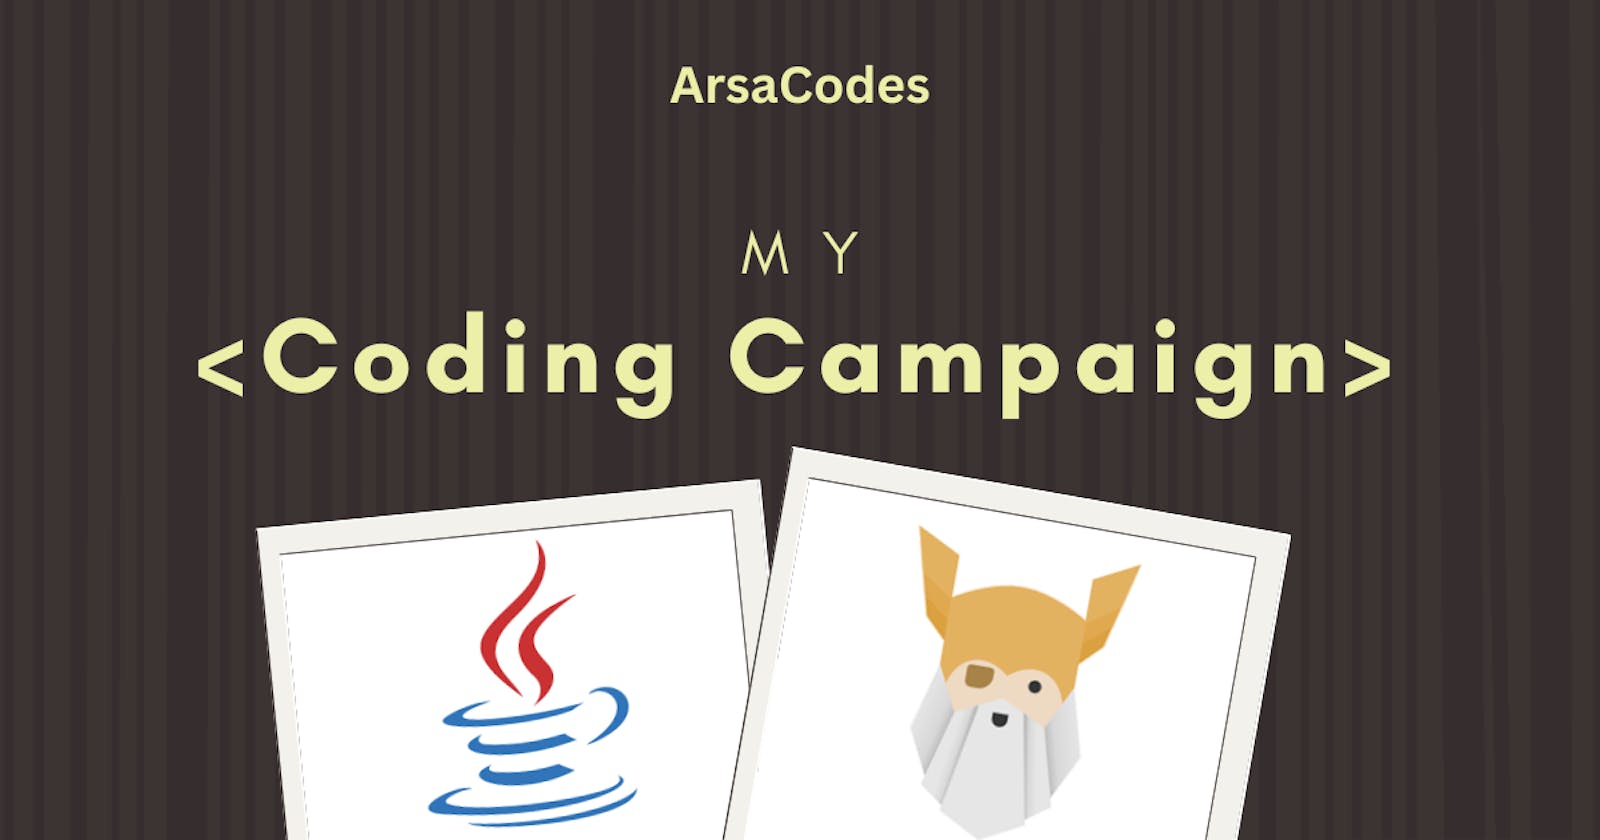 Day 1: My Coding Campaign